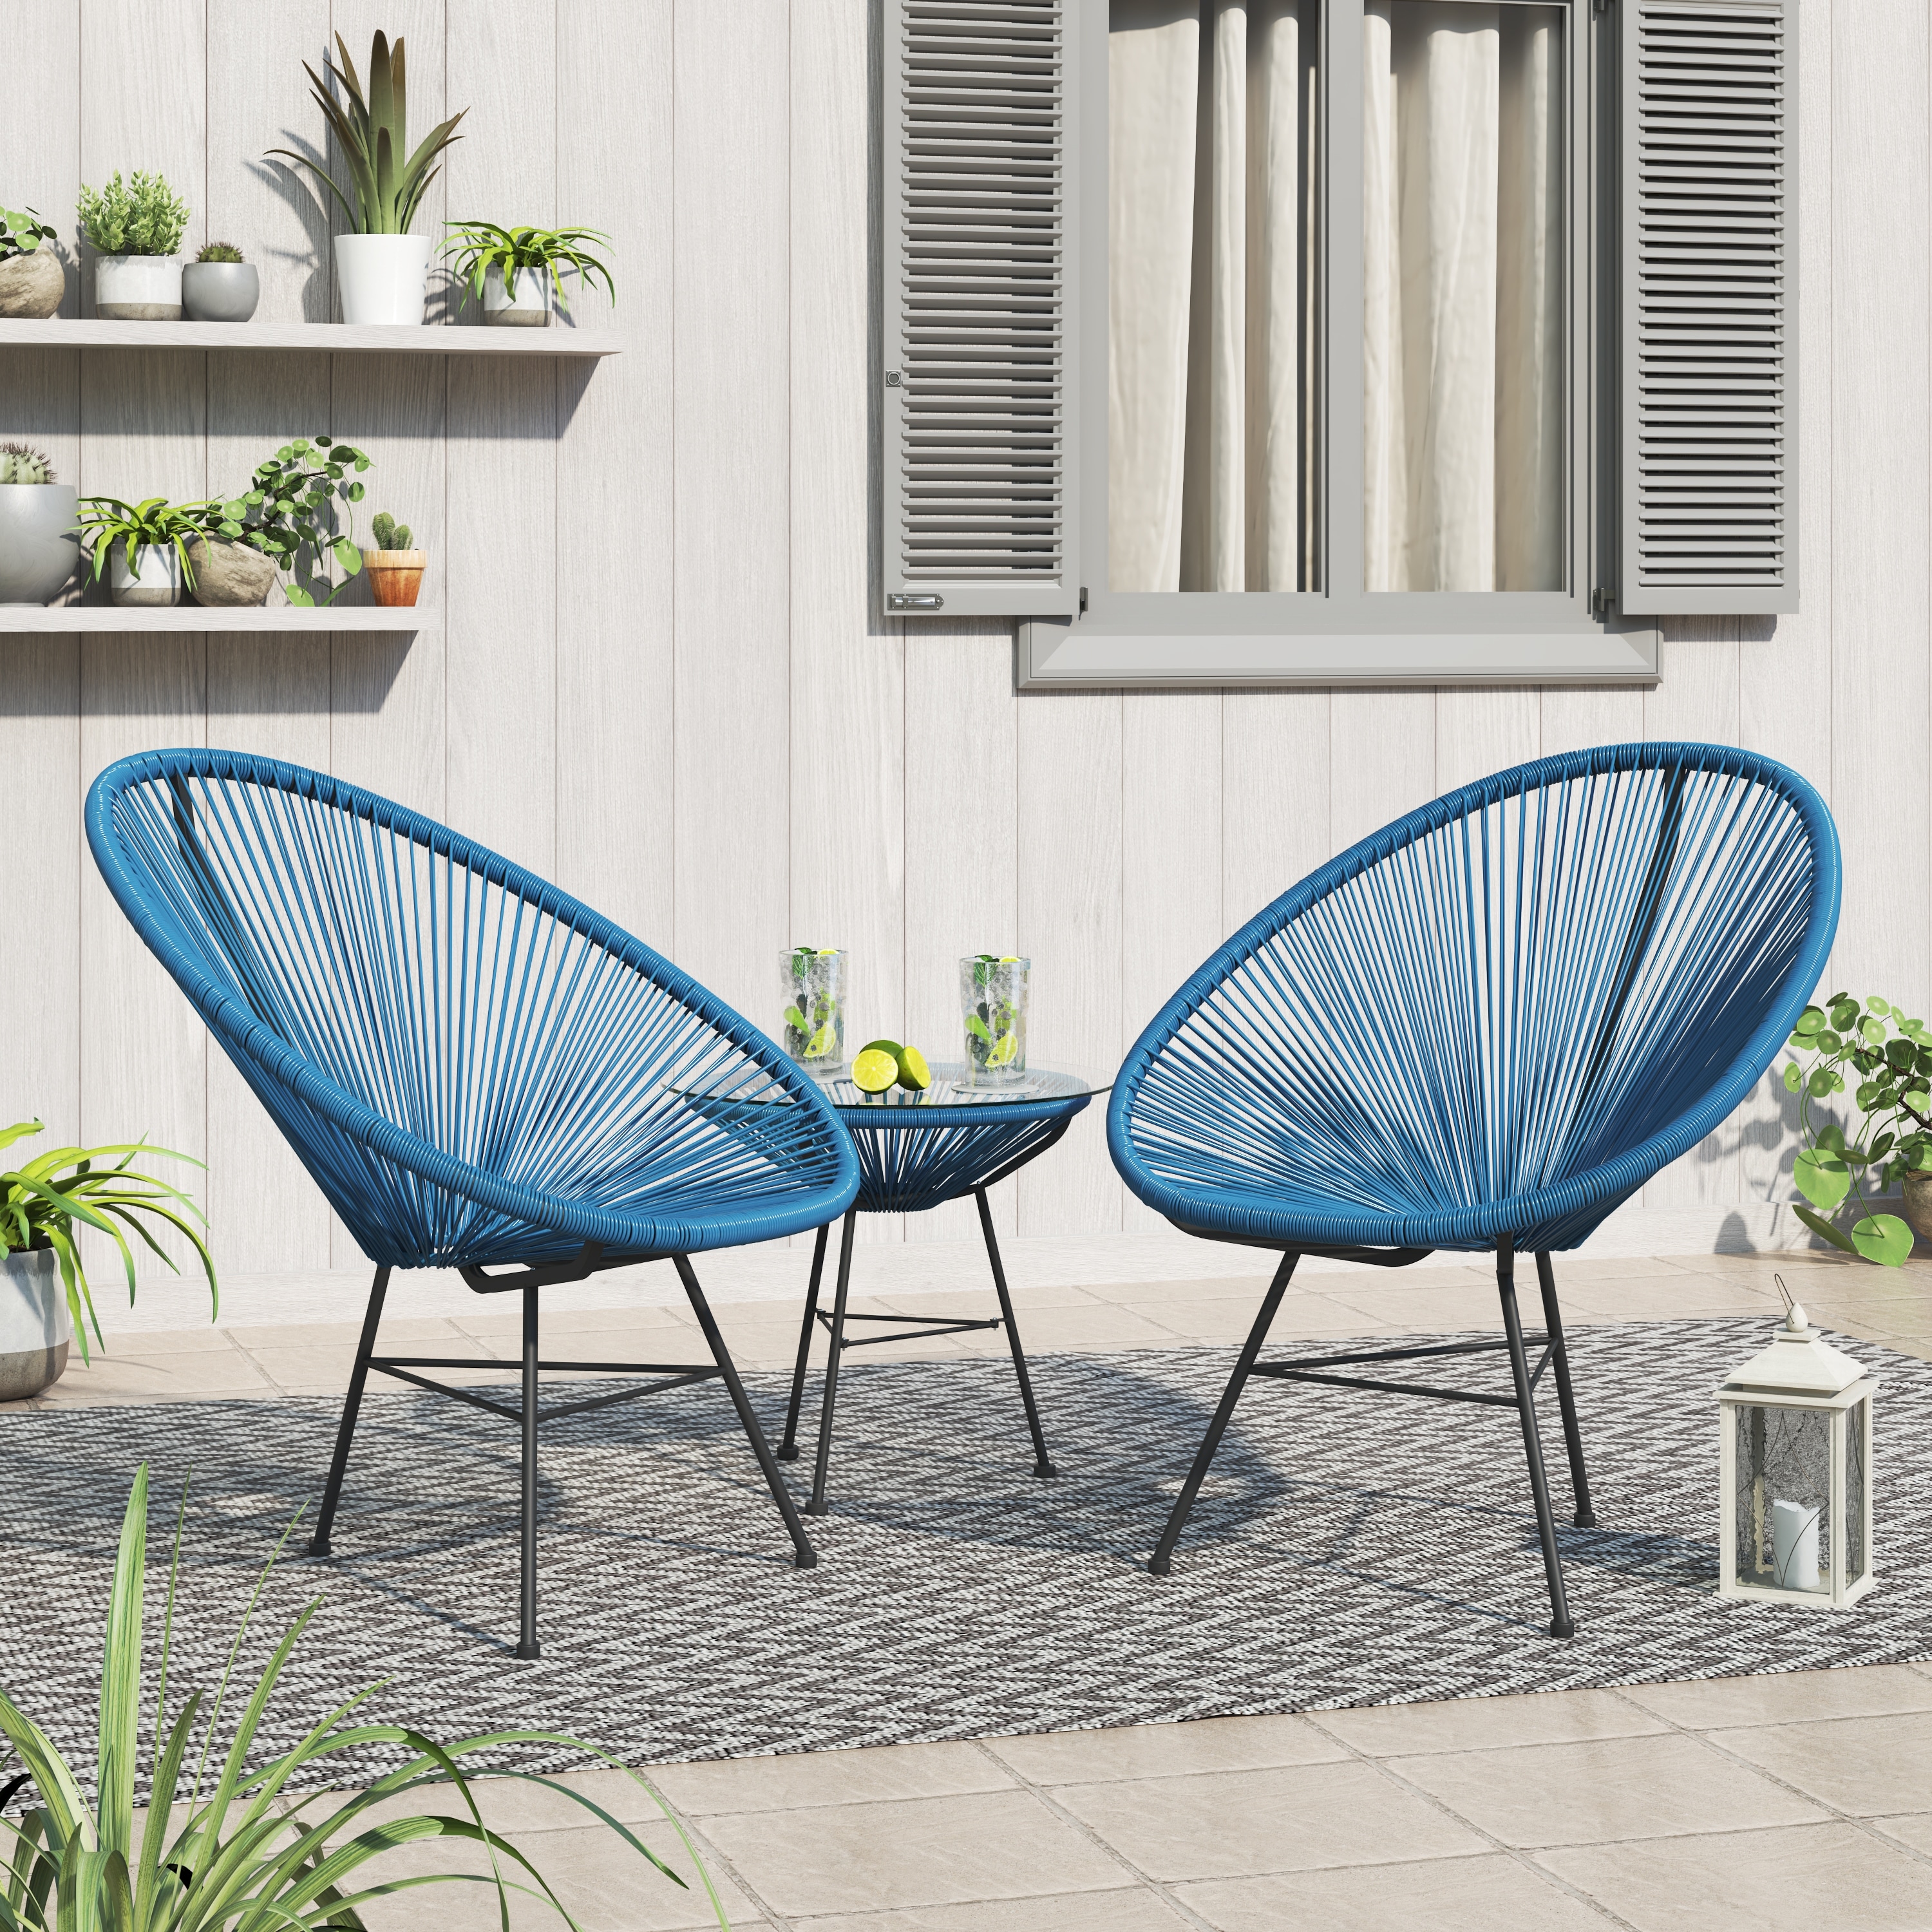 Sarcelles 3-piece Modern Wicker Acapulco Chat Set By Corvus